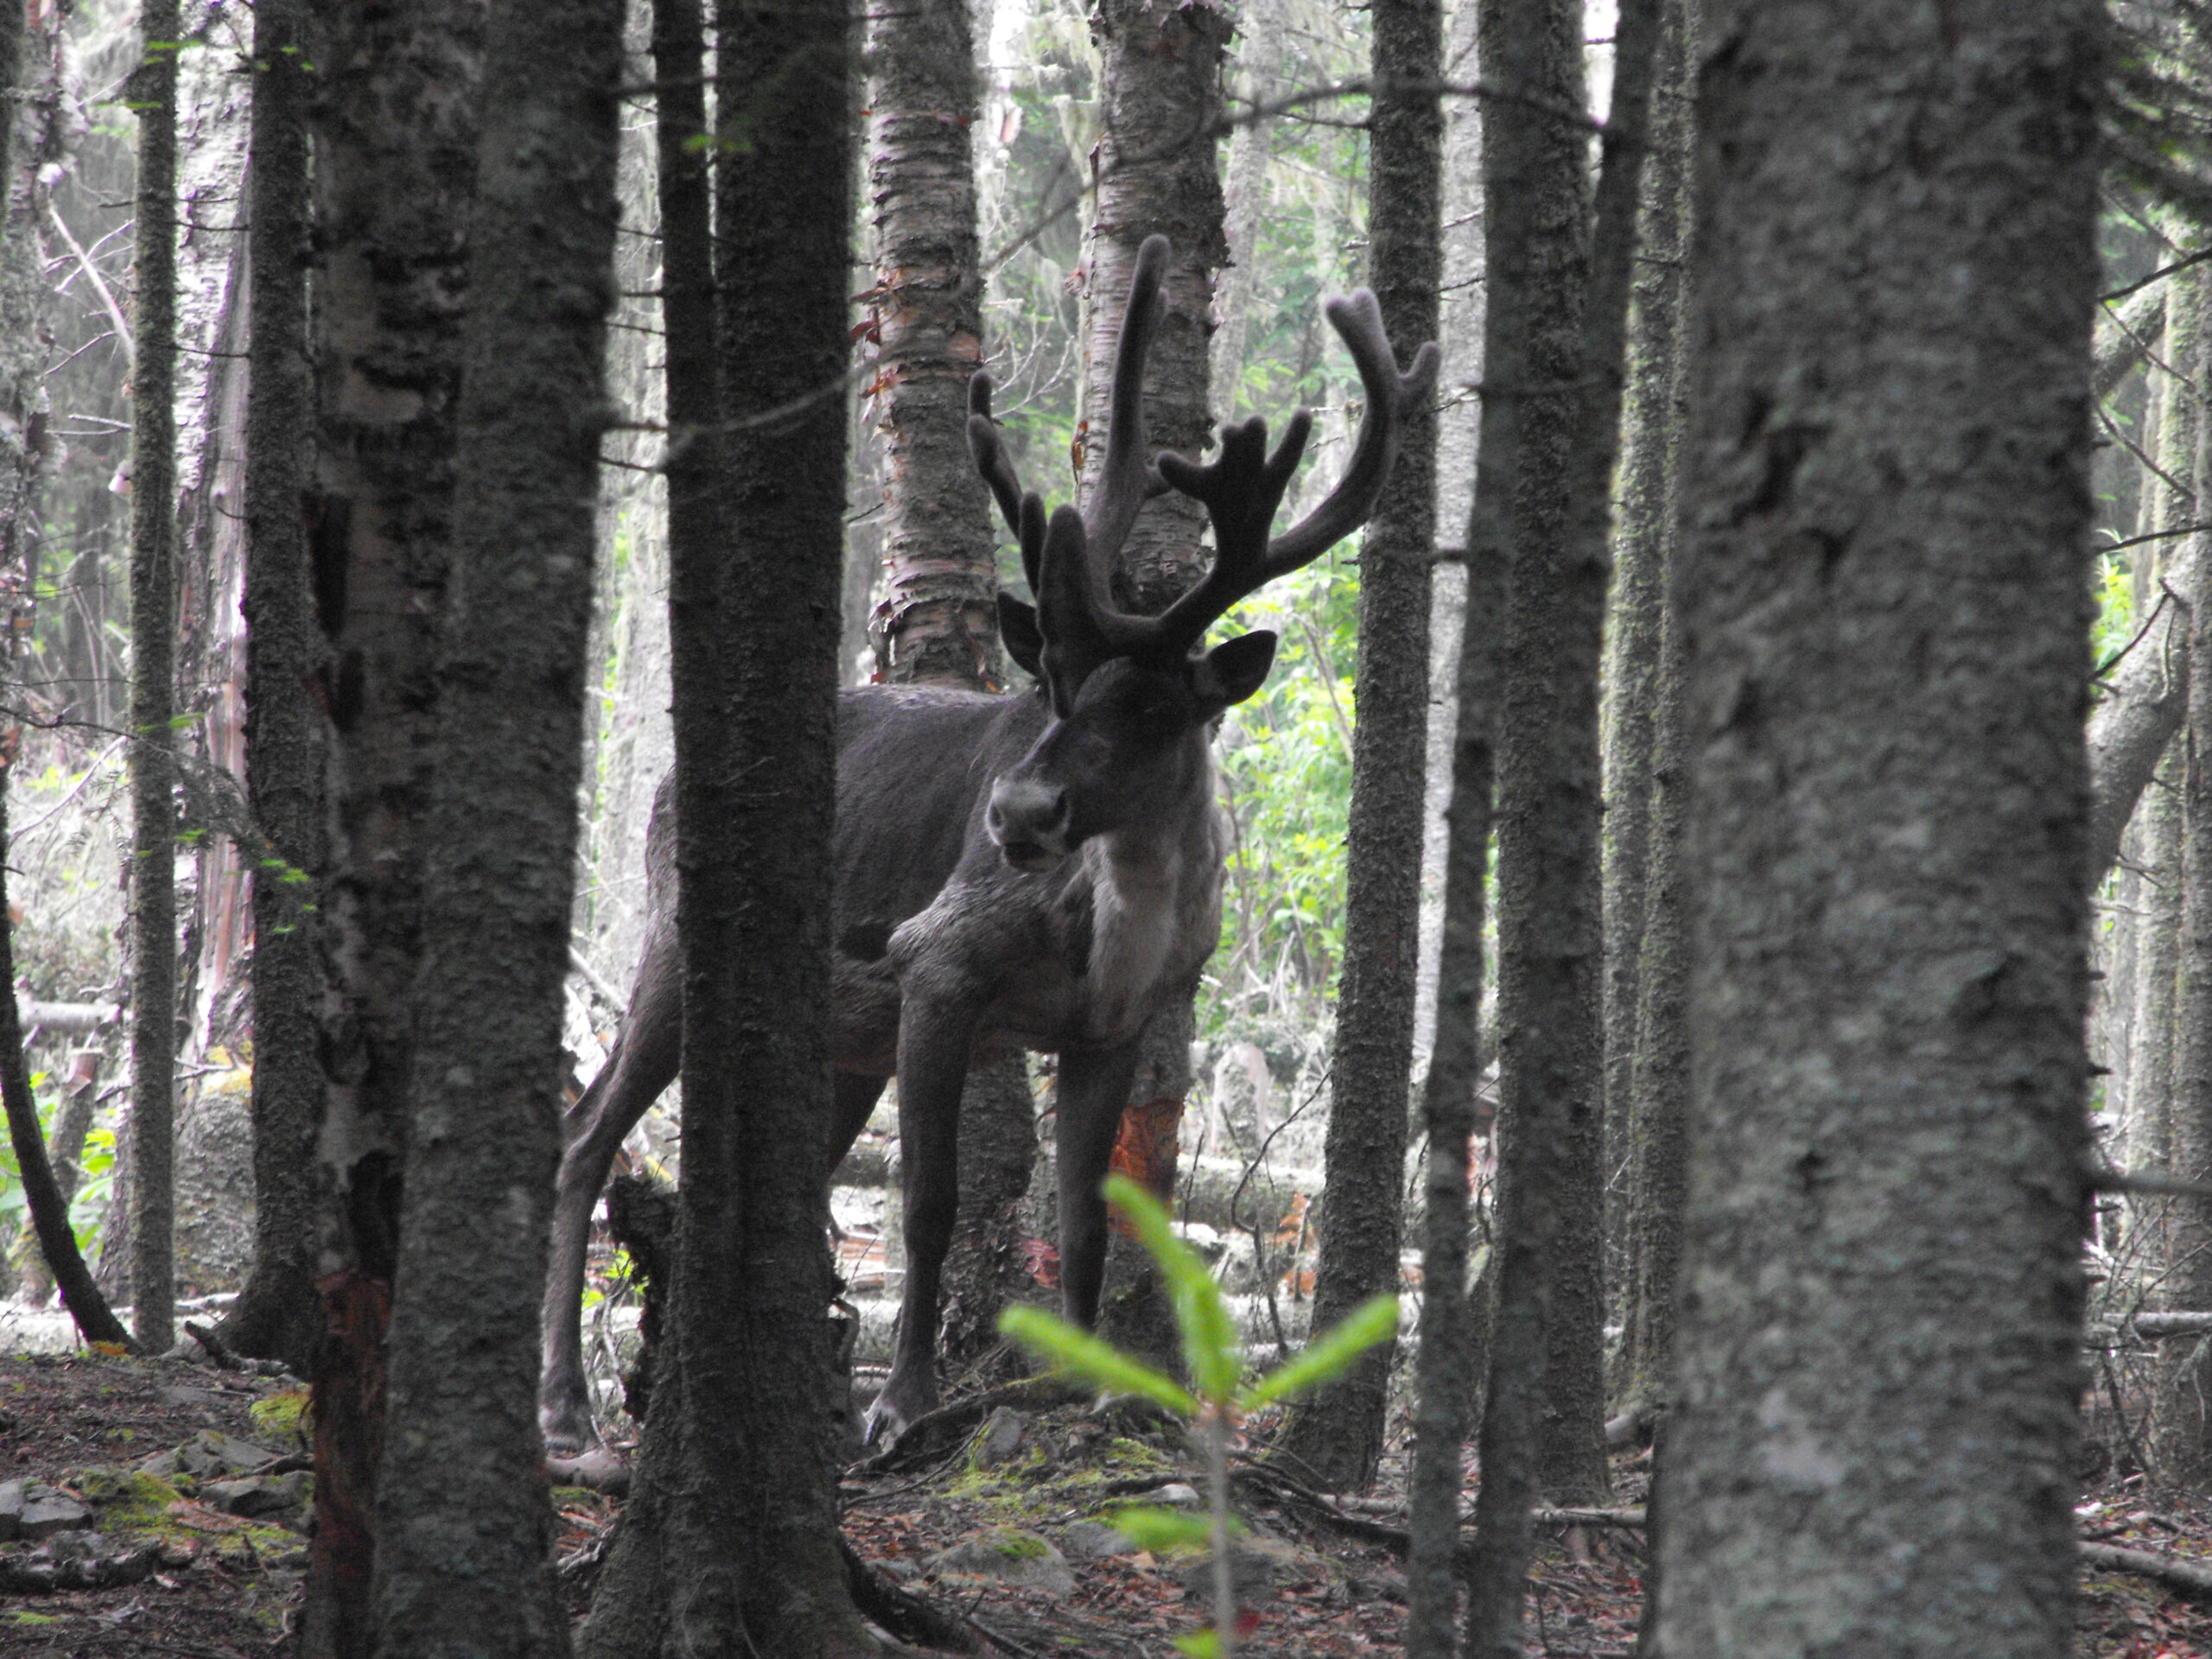 A caribou with antlers looks to the left, surrounded by gray tree trunks, on Lake Superior's Slate Islands.